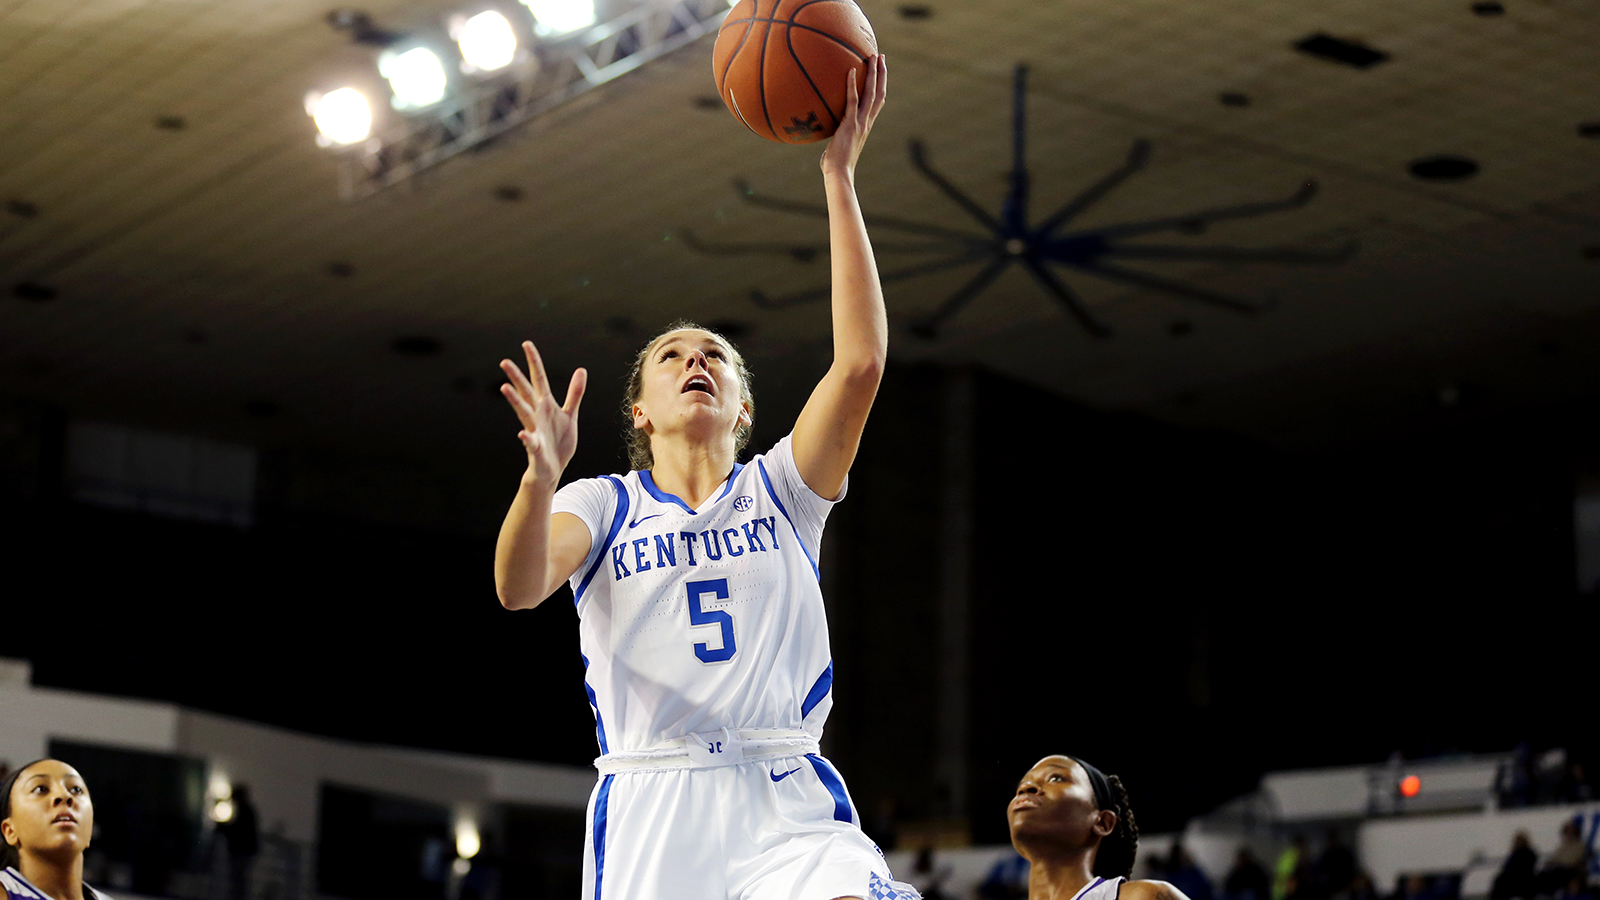 Balanced Scoring Attack Leads Kentucky Past High Point